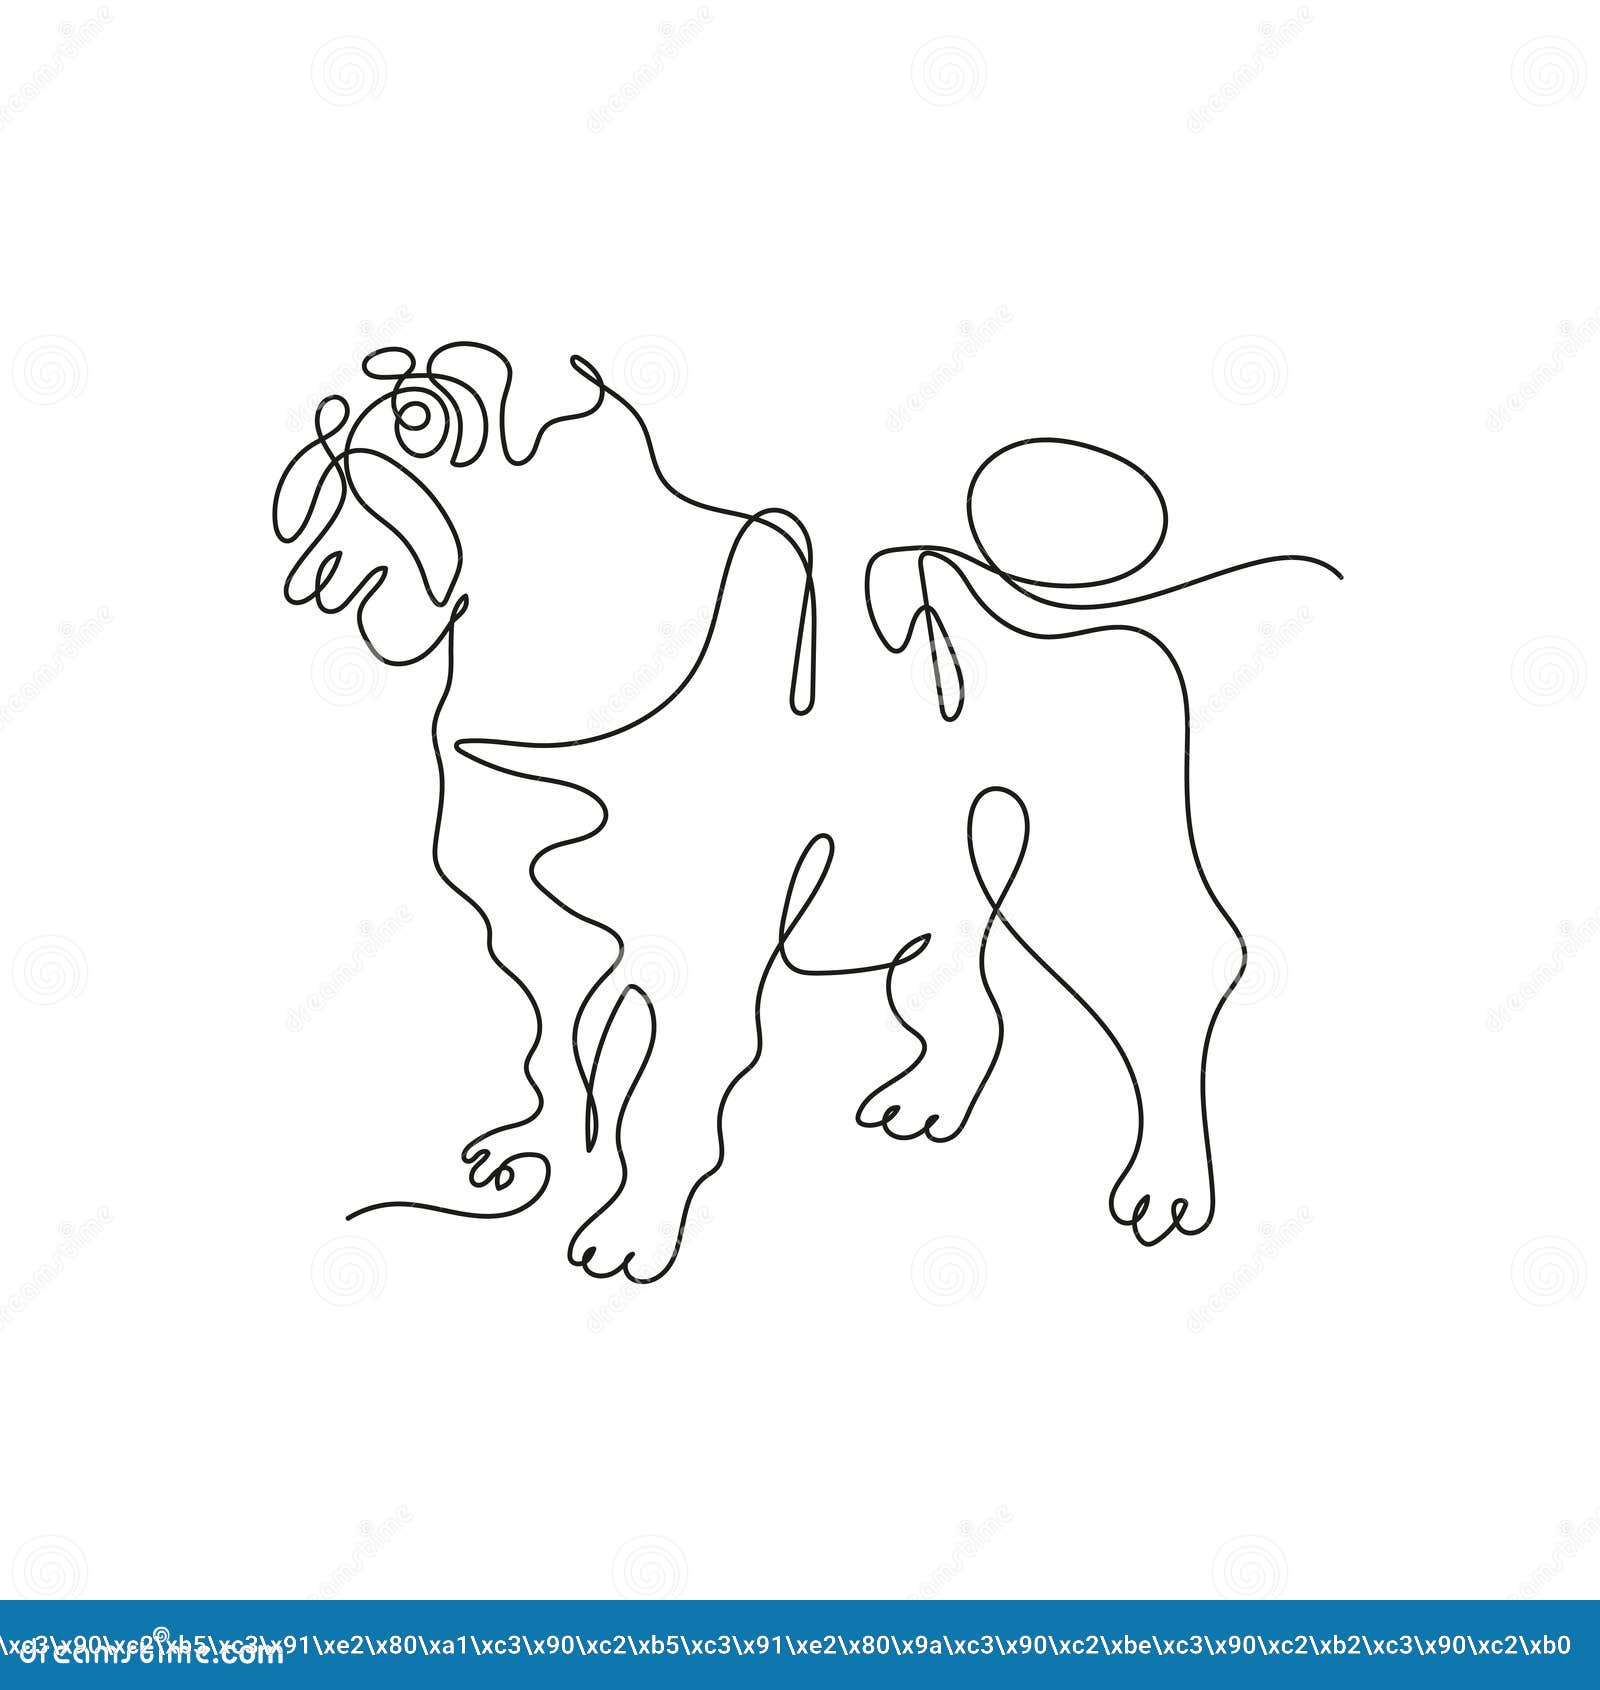 Pug Dog Vector Hd PNG Images, Vector Of Pug Dog Face On White Background,  Tattoo, Cartoon, Purebred PNG Image For Free Download